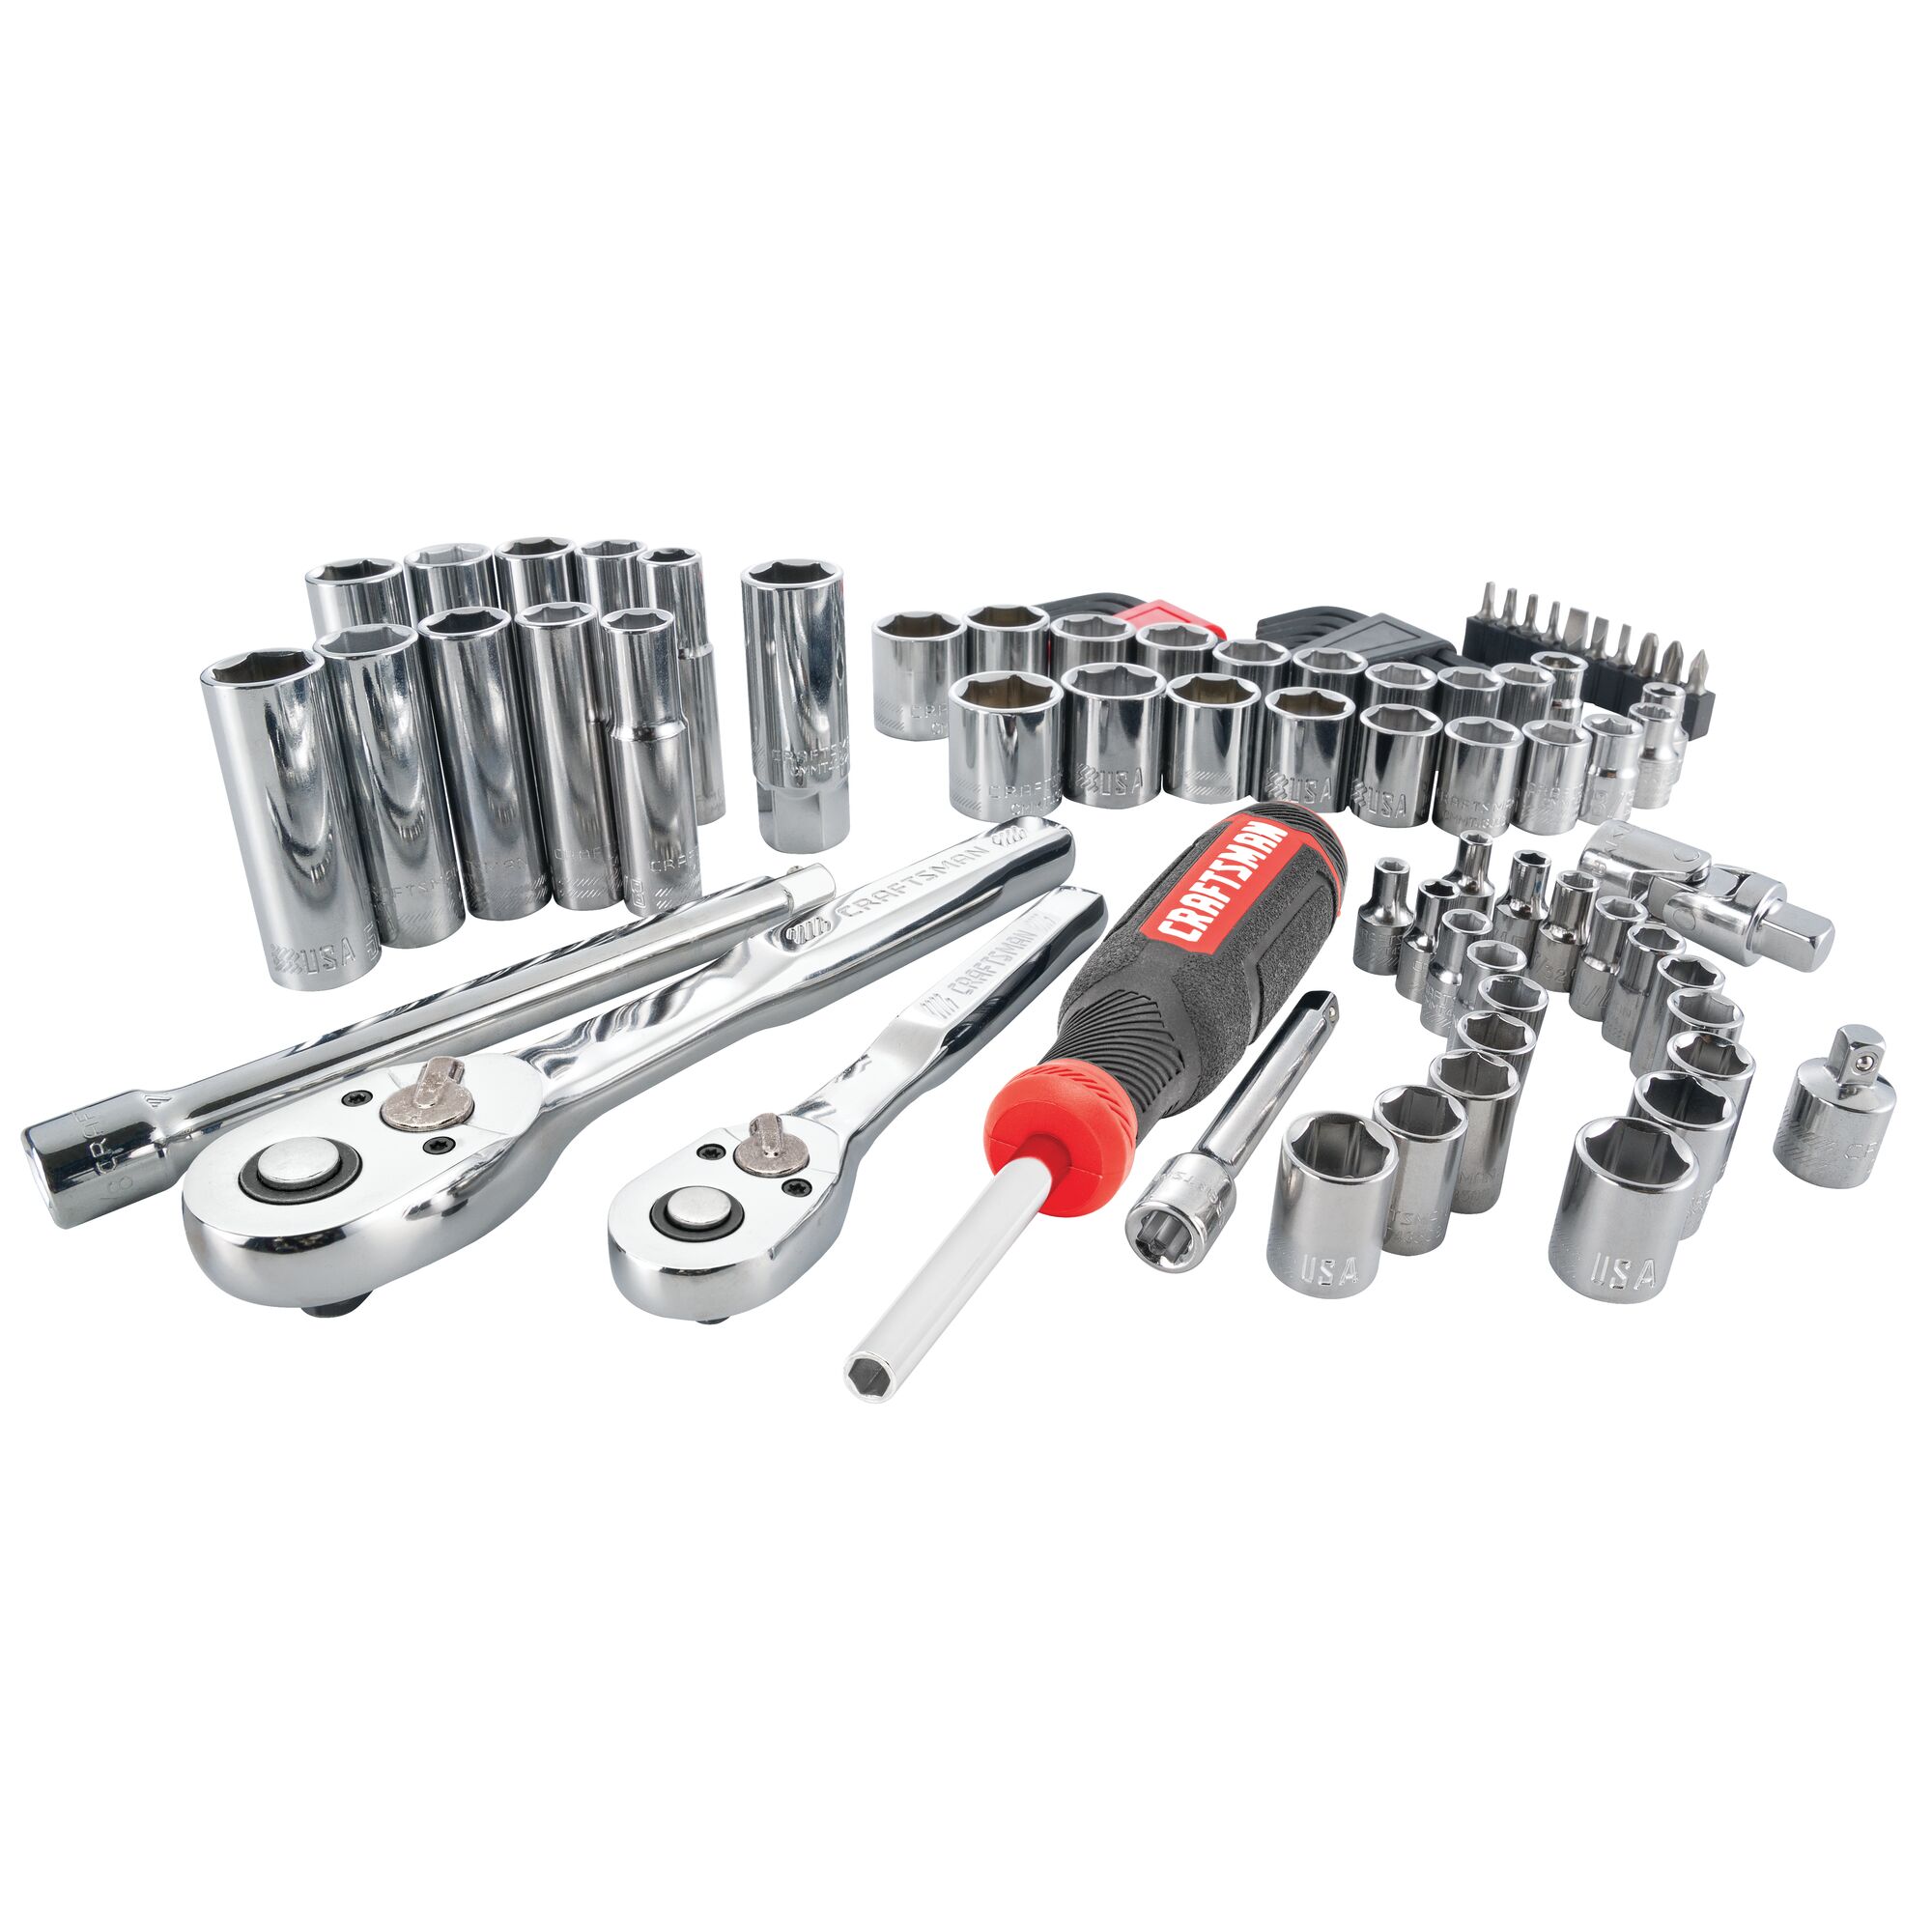 CRAFTSMAN 10-Piece Multi-drive Accessory Set in the Drive Tool